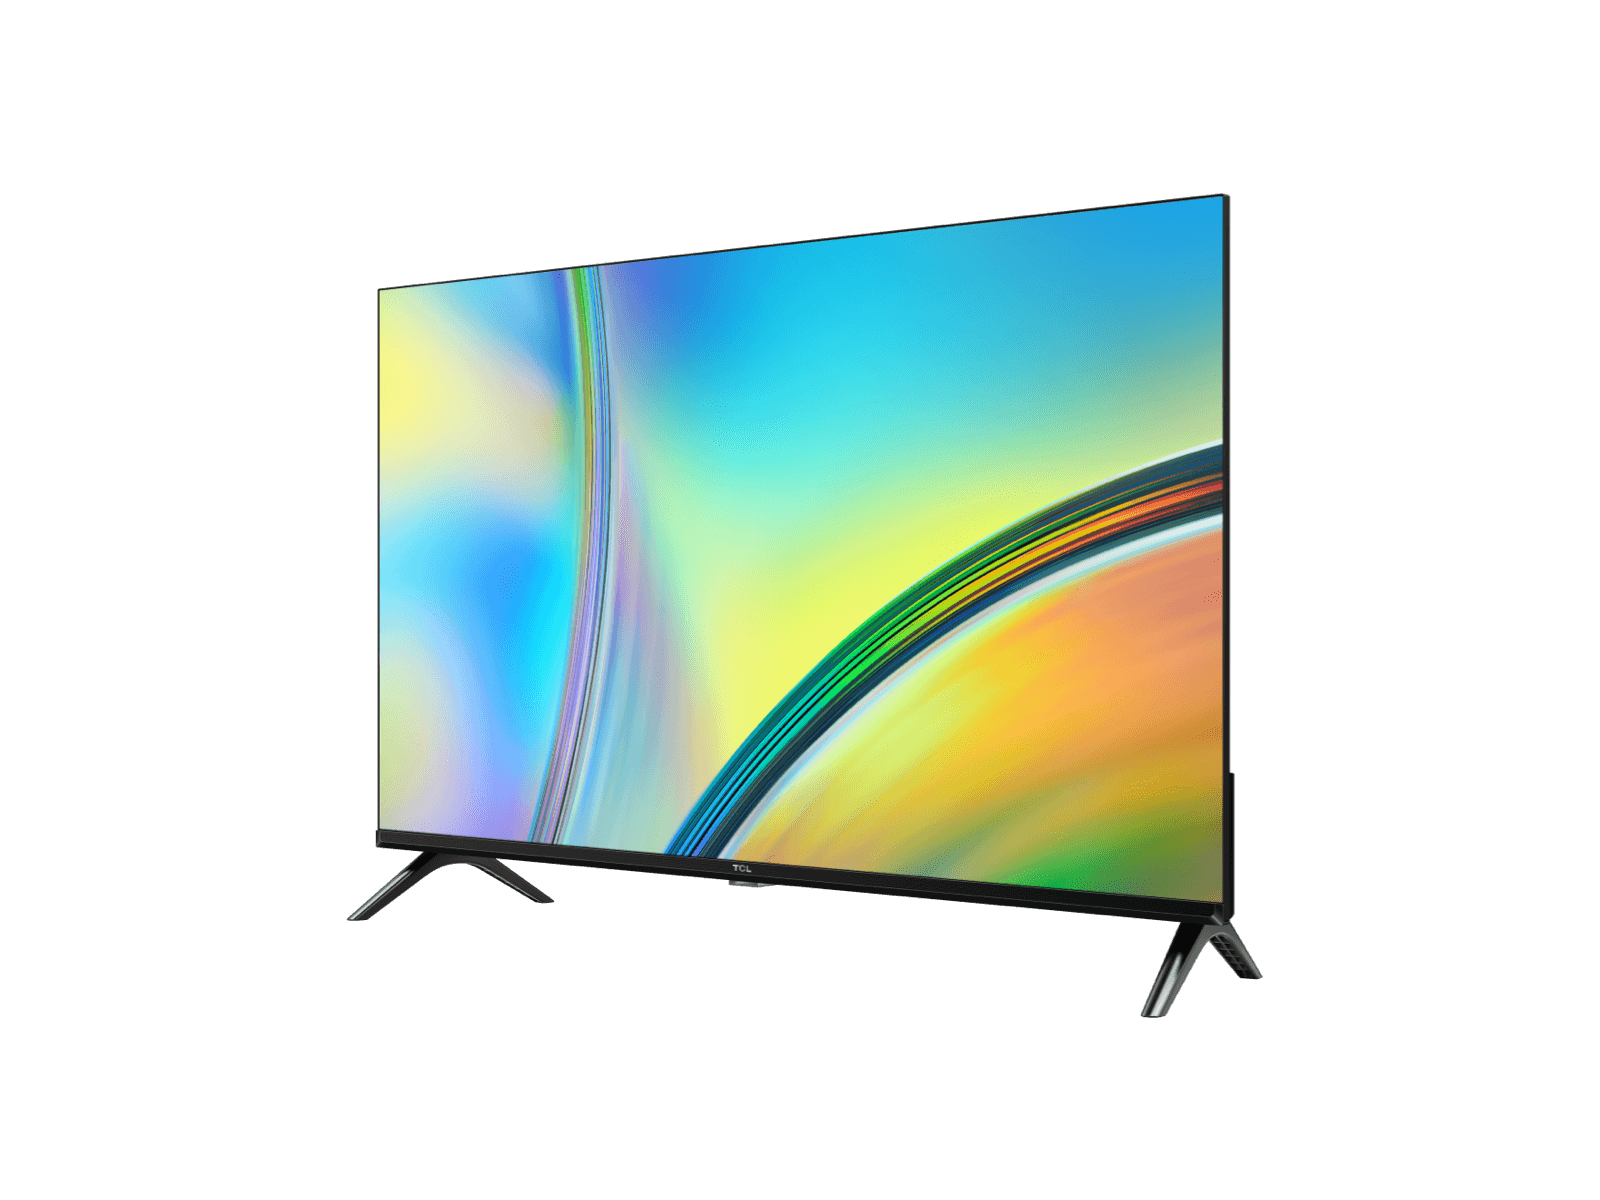 Frameless Full HD HDR TV with Android TV -32 inch TV - S5400AF